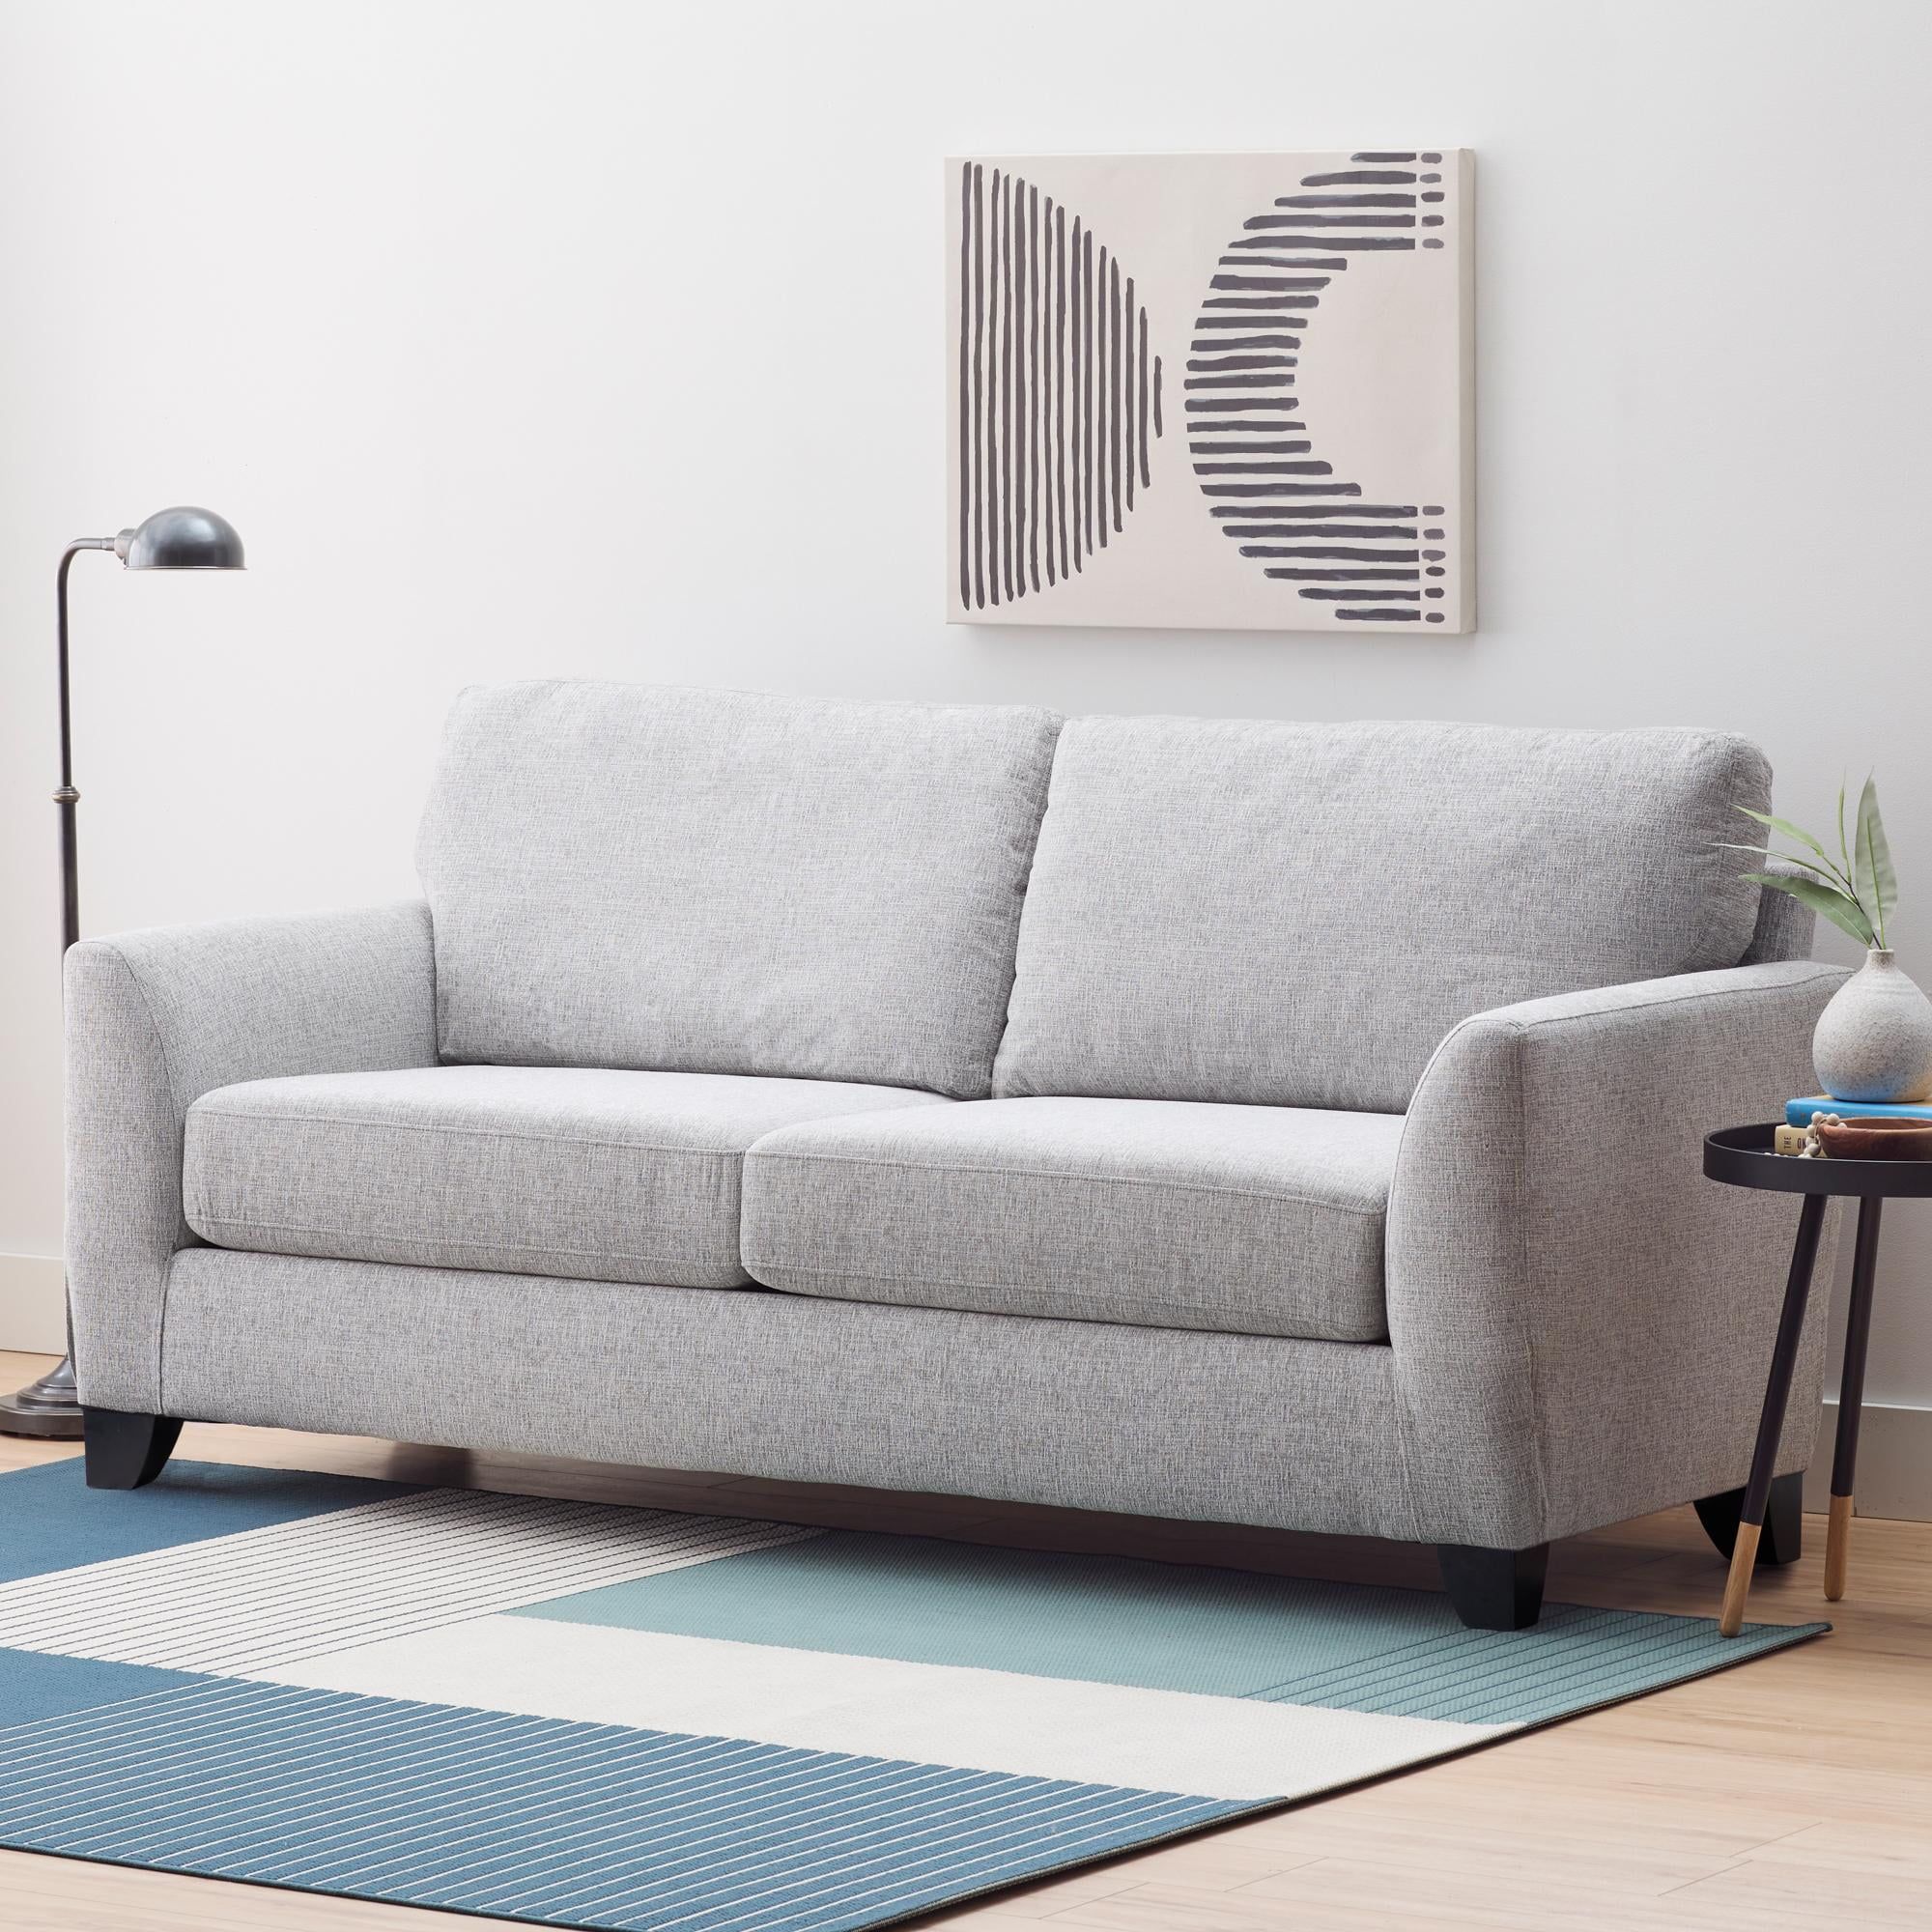 Gap Home Curved Arm Upholstered Sofa, Gray – Walmart Regarding Sofas With Curved Arms (Photo 13 of 15)